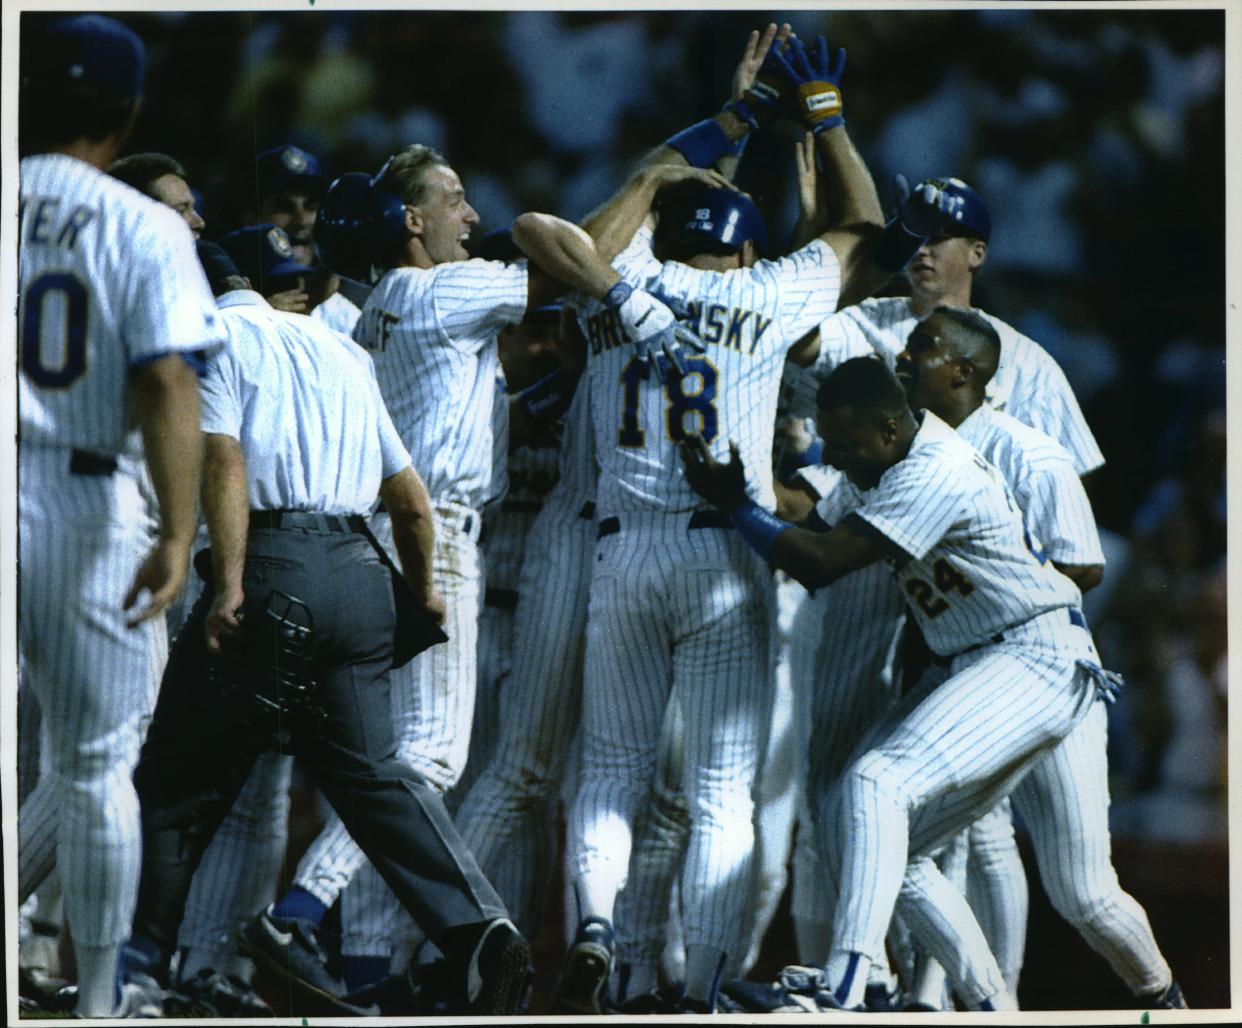 Tom Brunansky is the man of the moment after his two-run homer with two out in the ninth, which lifted the Brewers past Boston on July 26, 1993.